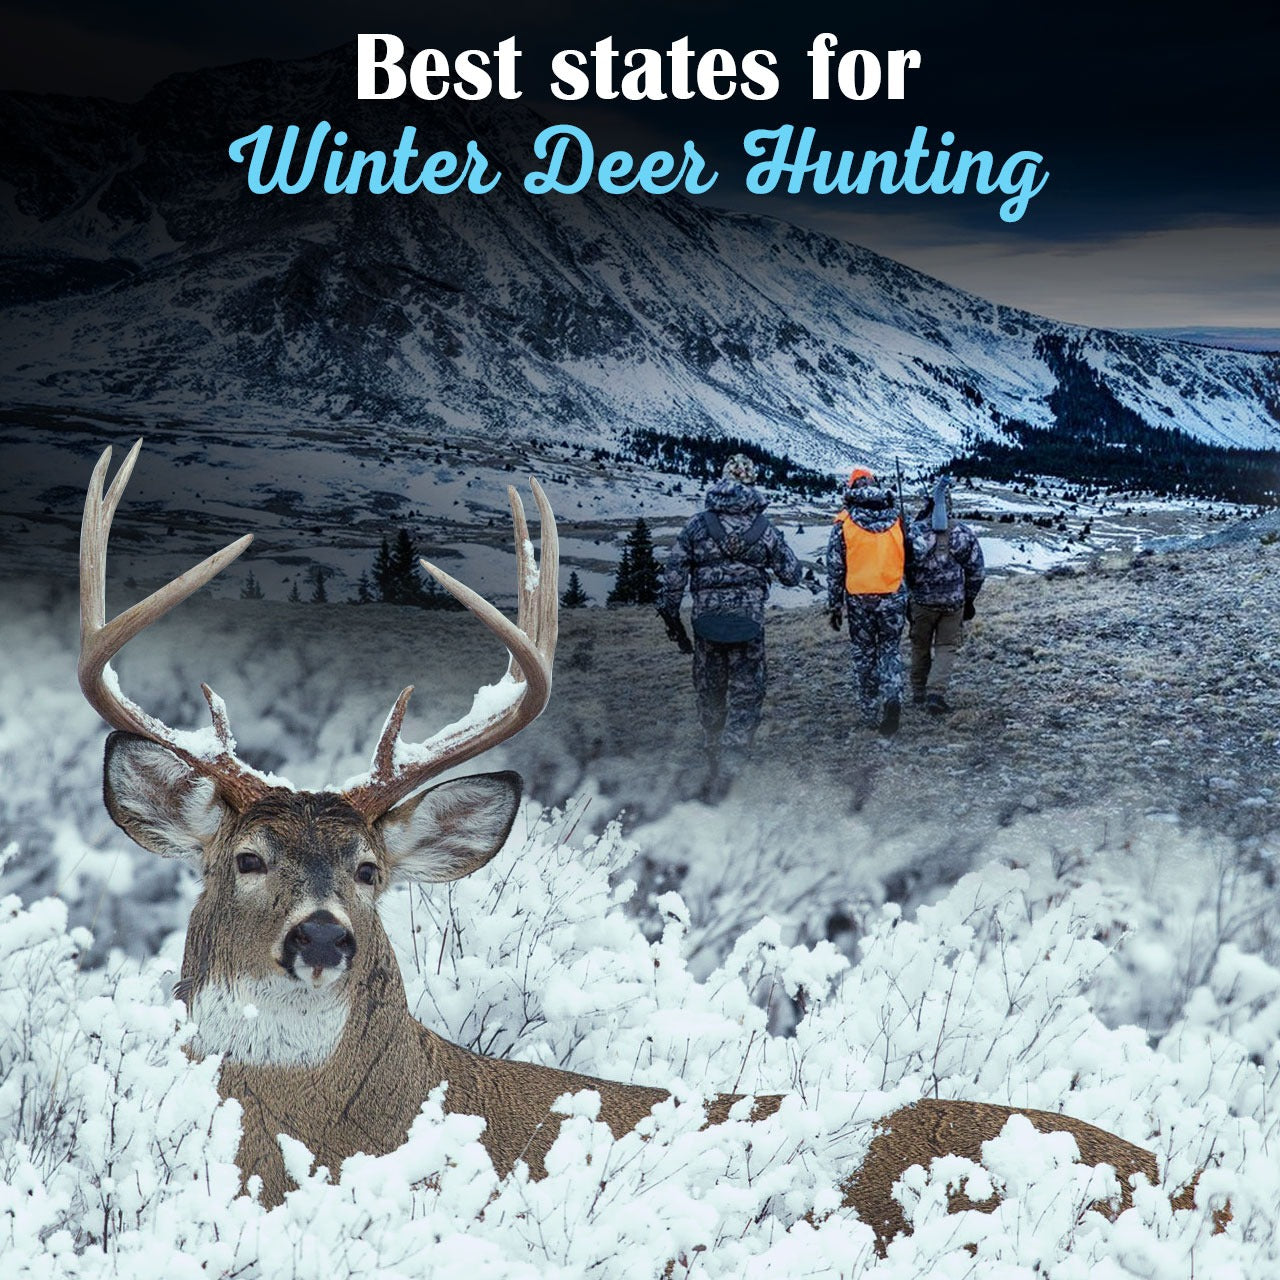 Best States for Winter Deer Hunting